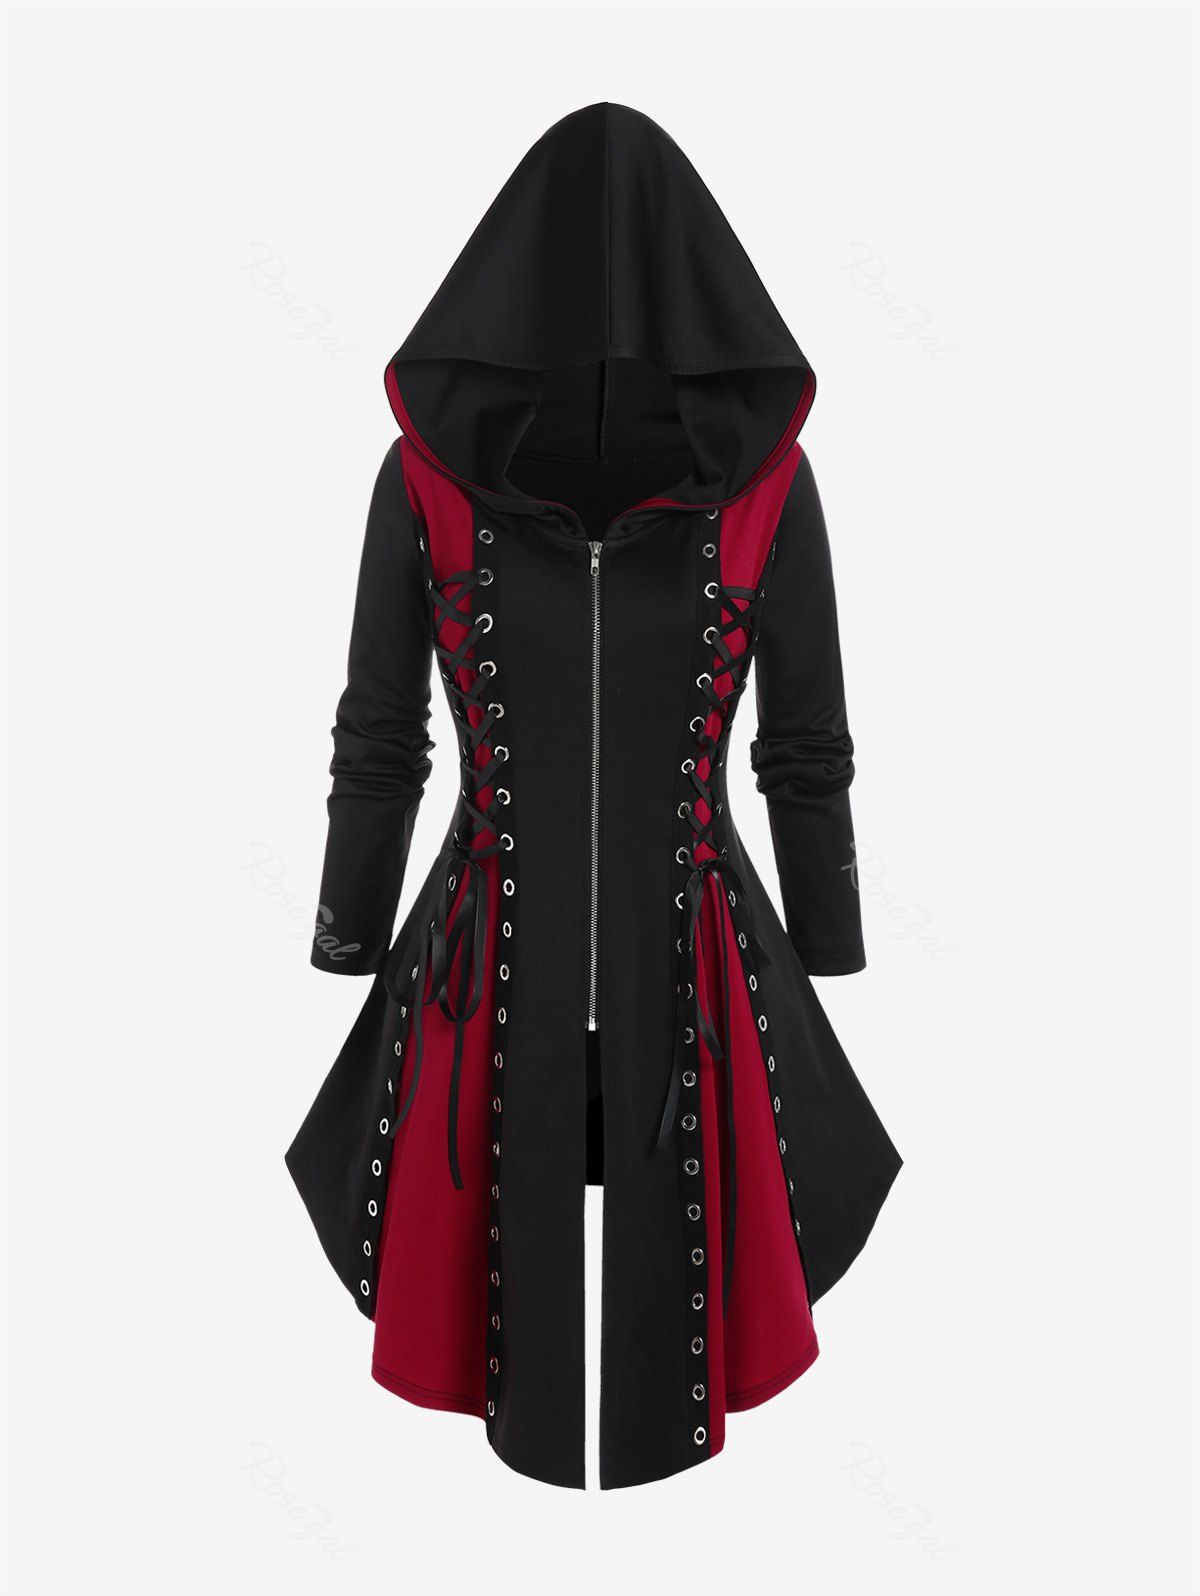 Cheap Hooded Lace Up Grommets Colorblock Gothic Coat  